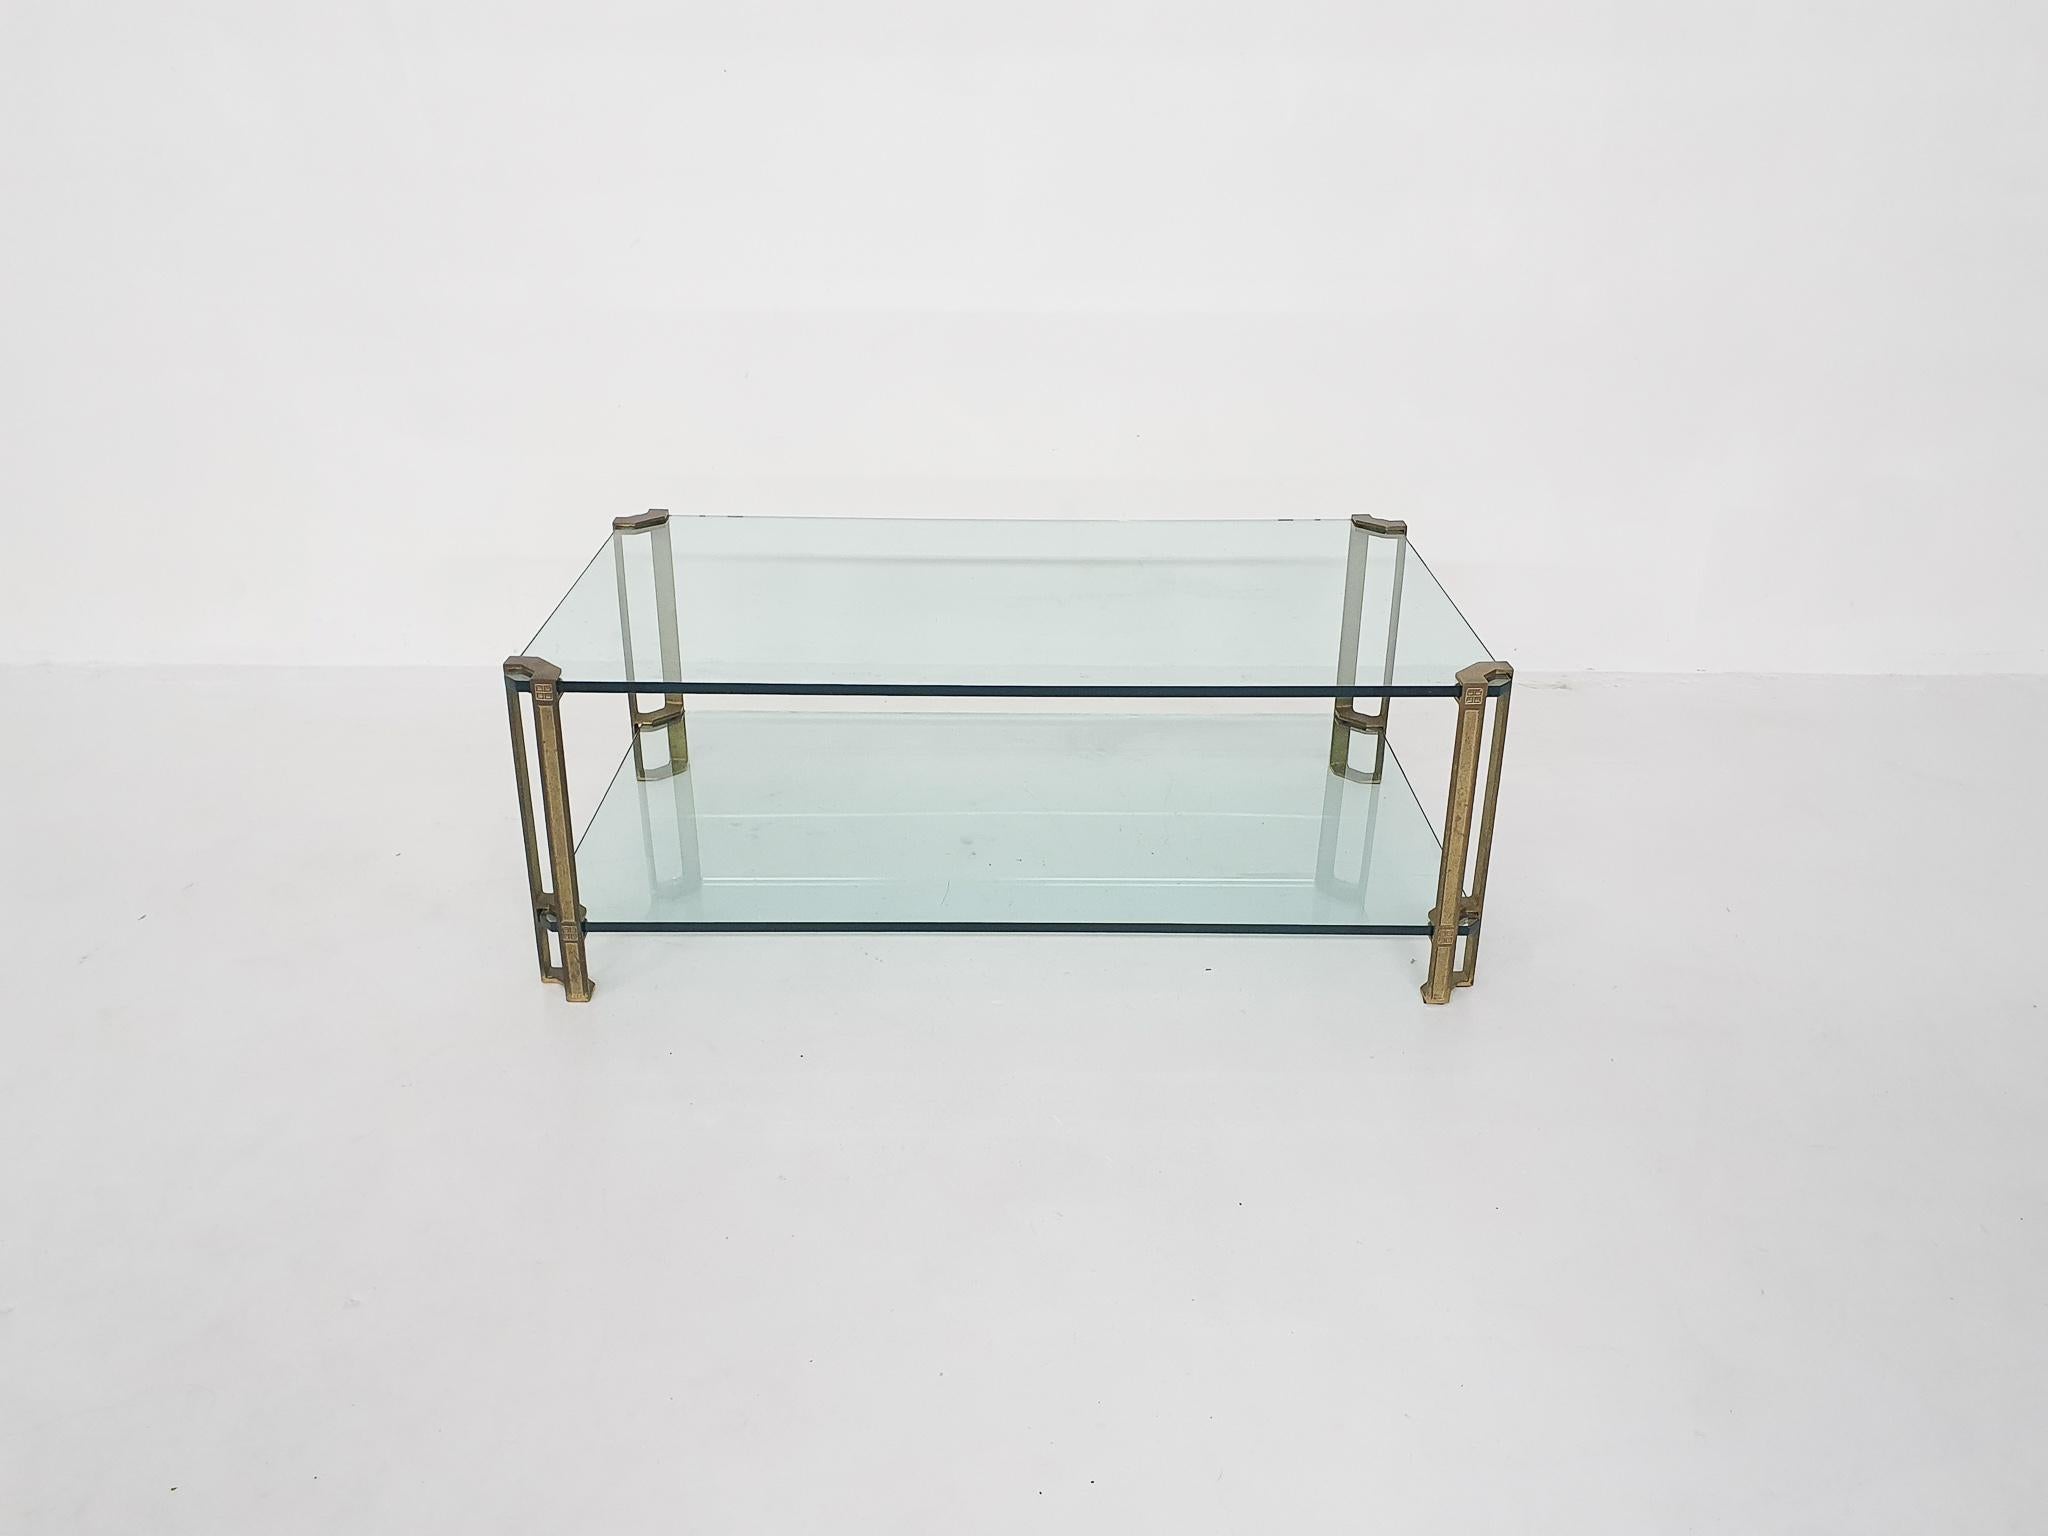 Coffee table by Peter Ghyczy. Solid brass legs and two thick glass plates.
One small chip from the corner of the glass.